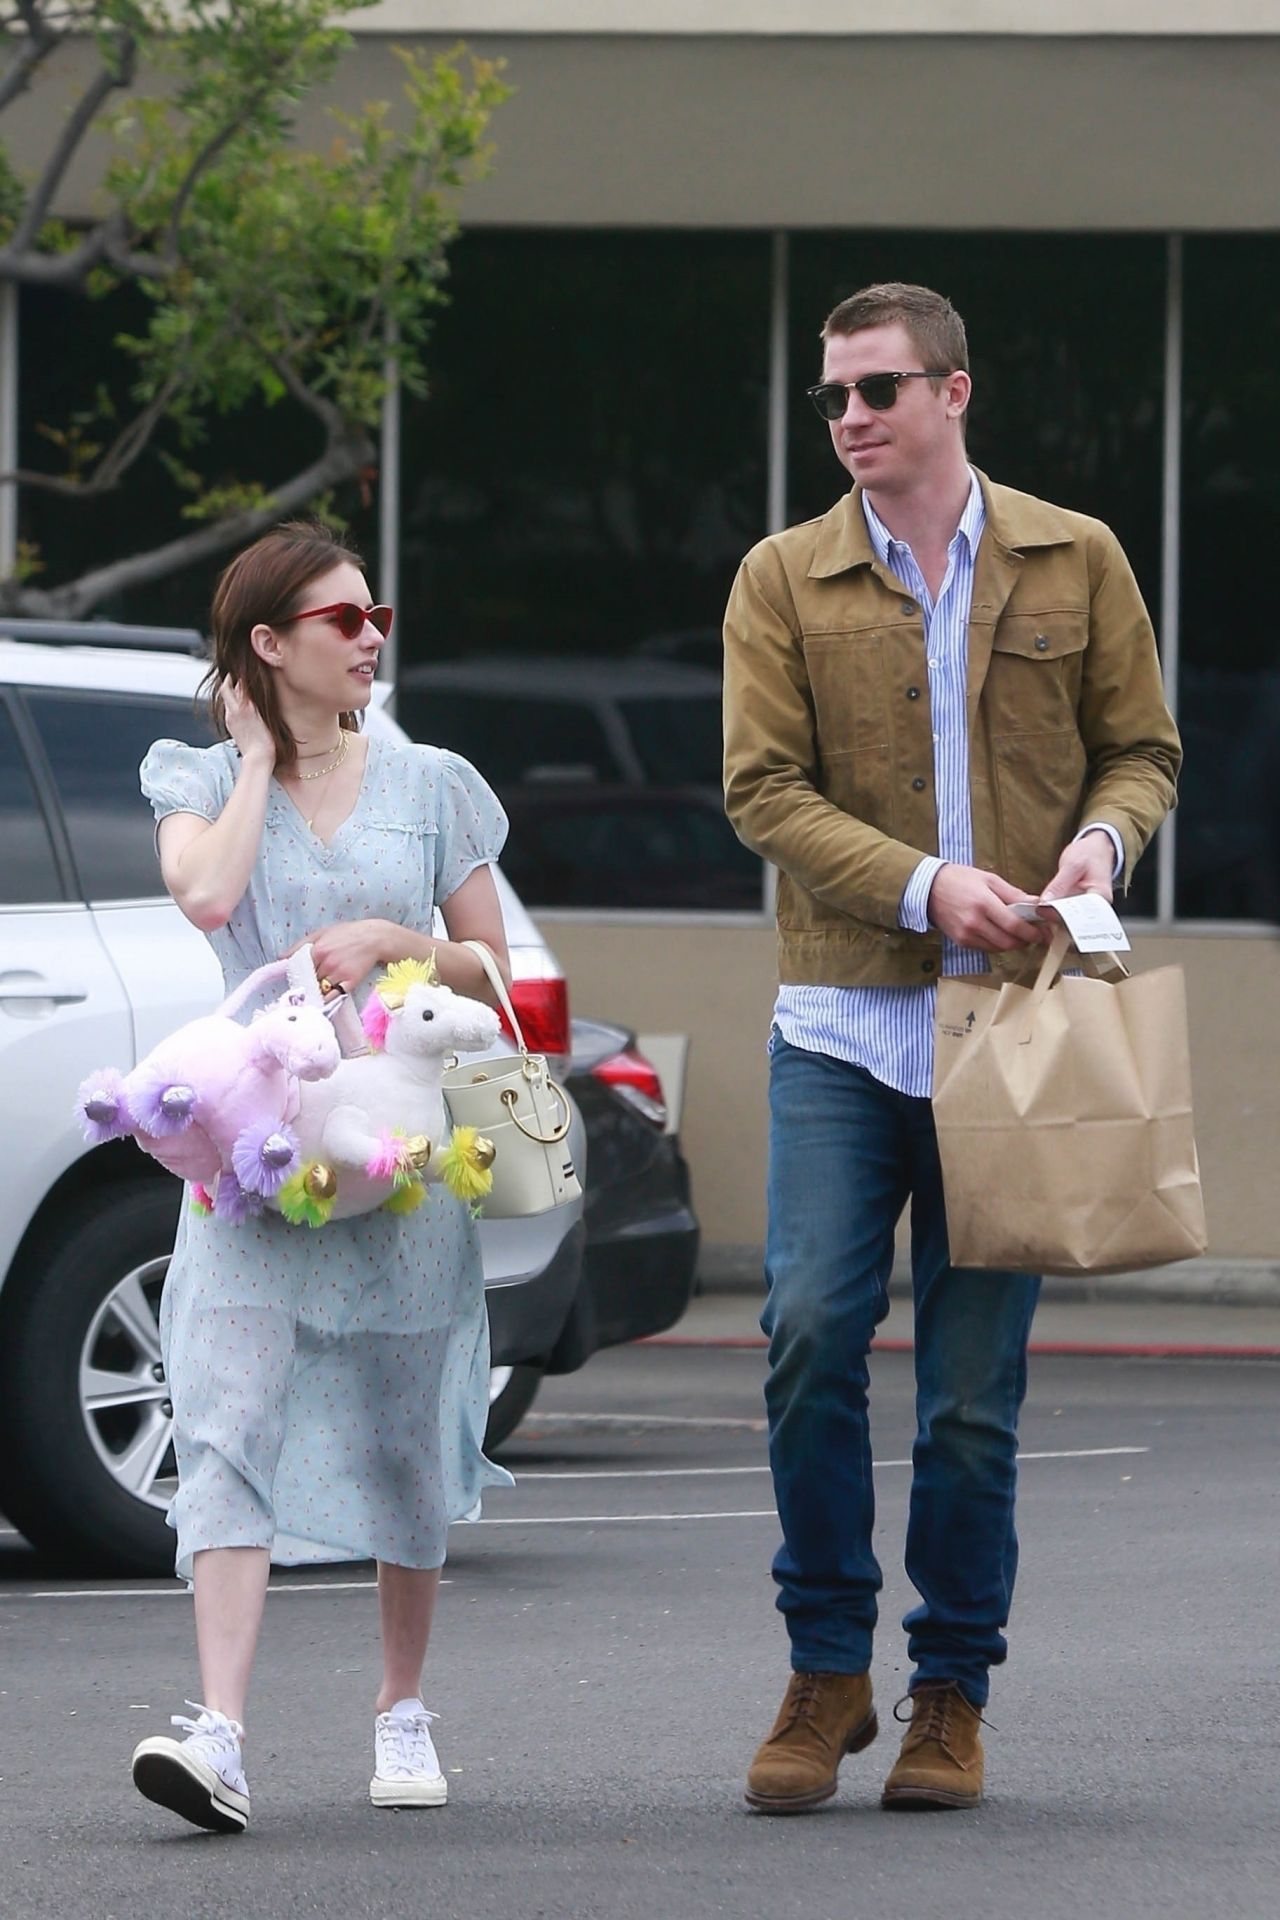 emma-roberts-shopping-on-easter-in-los-angeles-04-21-2019-10.jpg